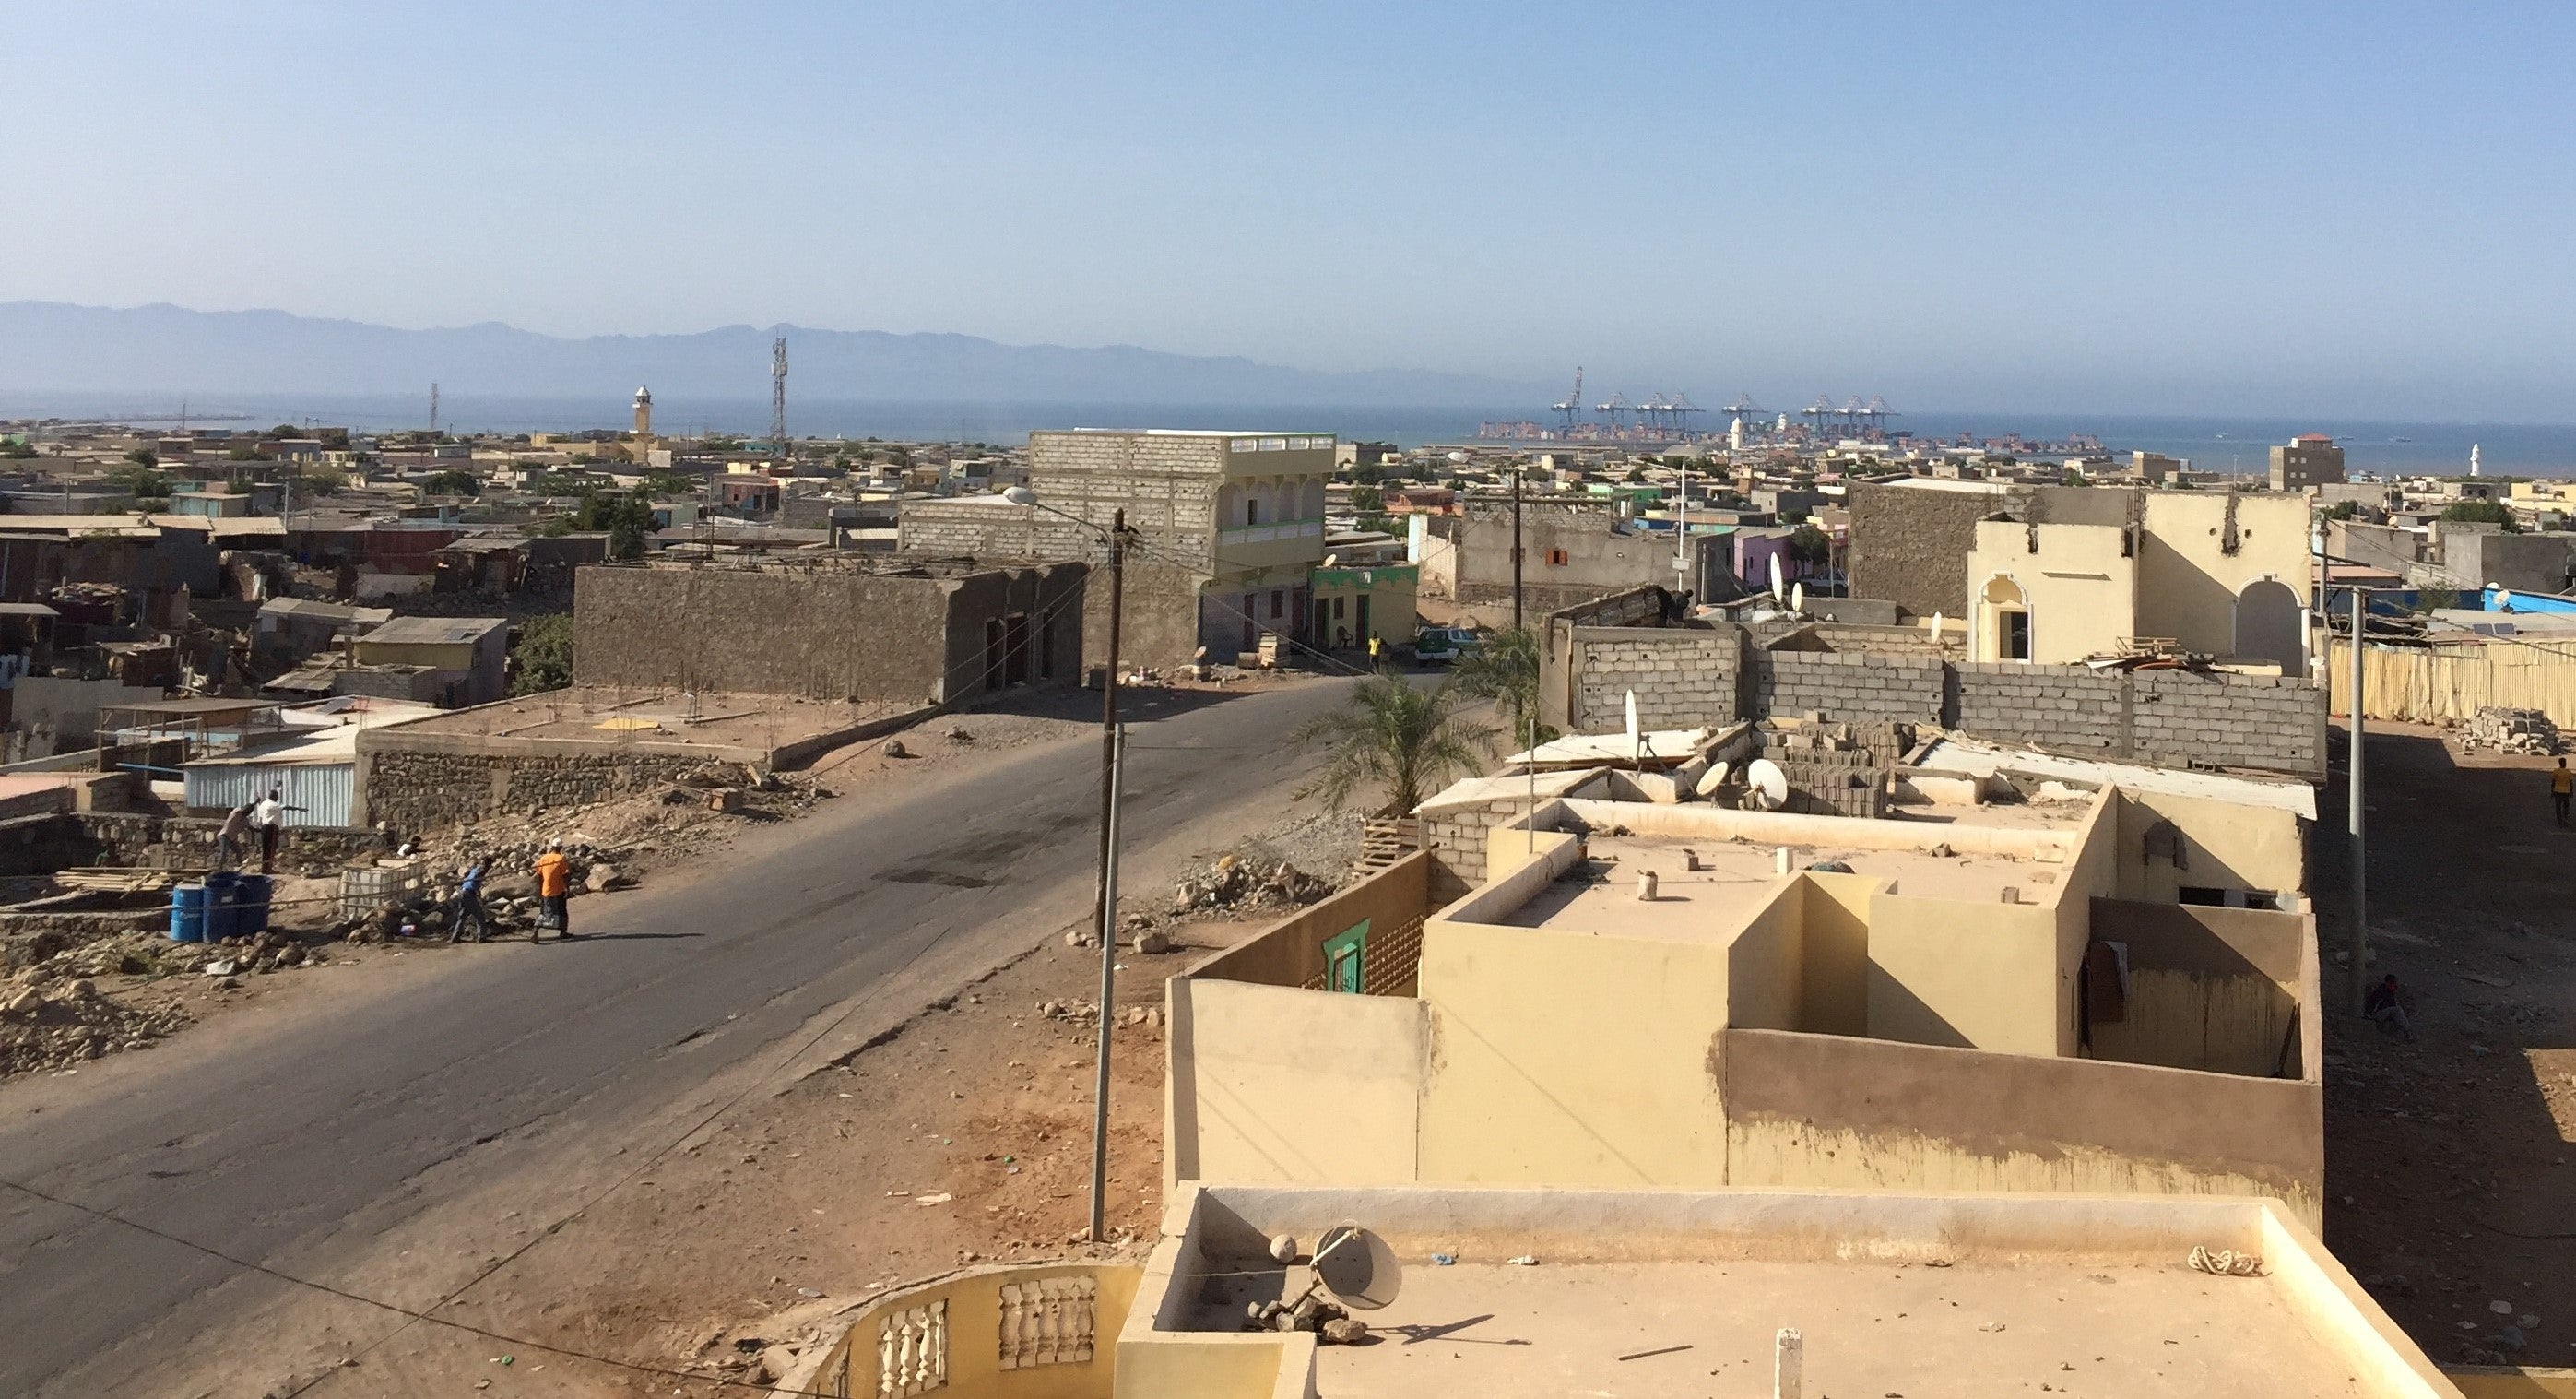 When it comes to security of land rights in Djibouti, about a third of the population resides in houses with a land title. [Photo Credit: Gabriel Lara Ibarra]